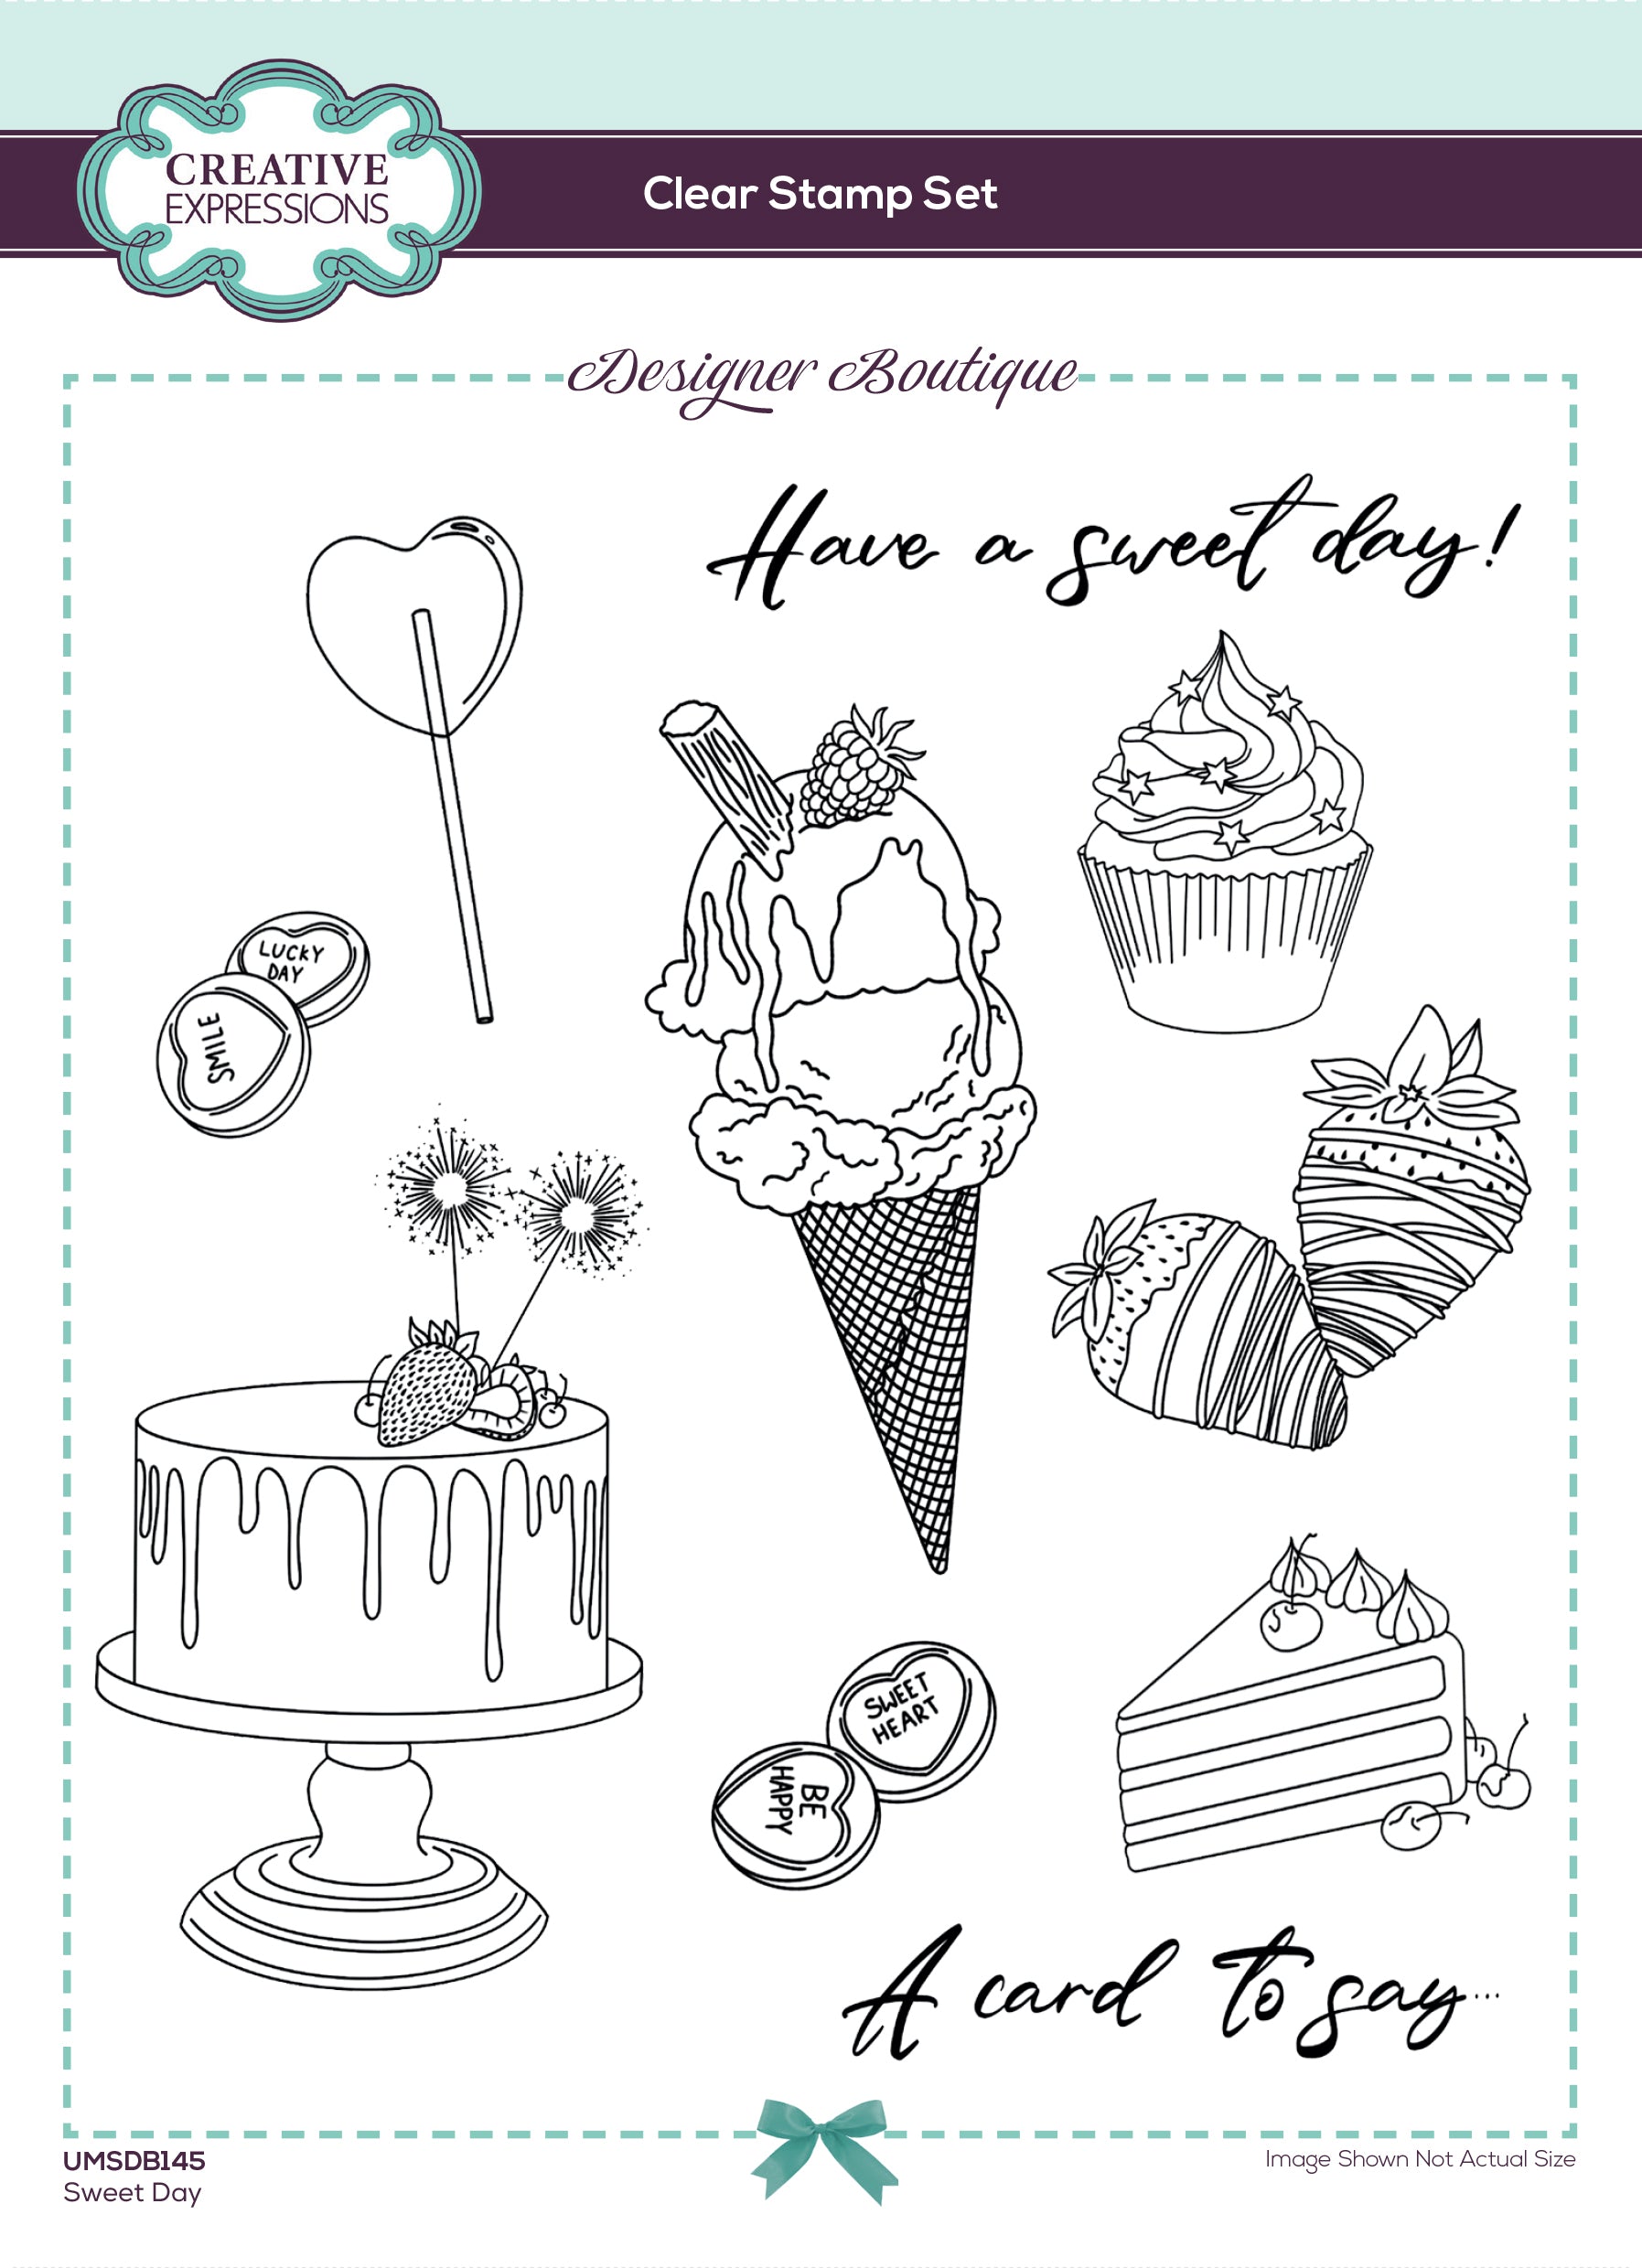 Creative Expressions Designer Boutique Sweet Day 6 in x 8 in Stamp Set